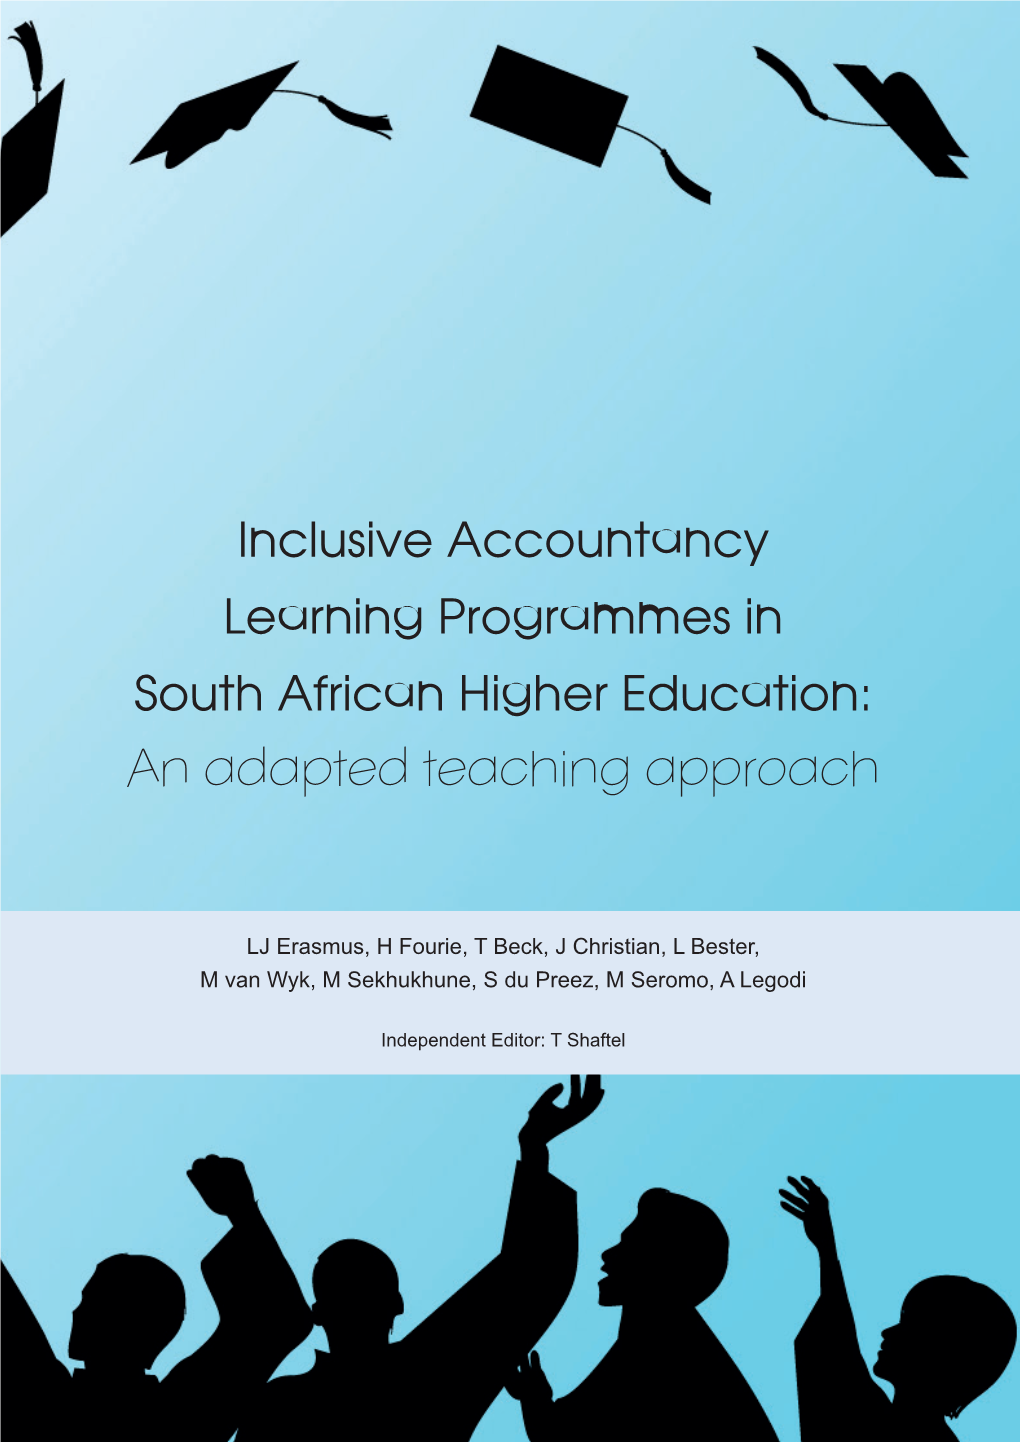 Inclusive Accountancy Learning Programmes in South African Higher Education: an Adapted Teaching Approach